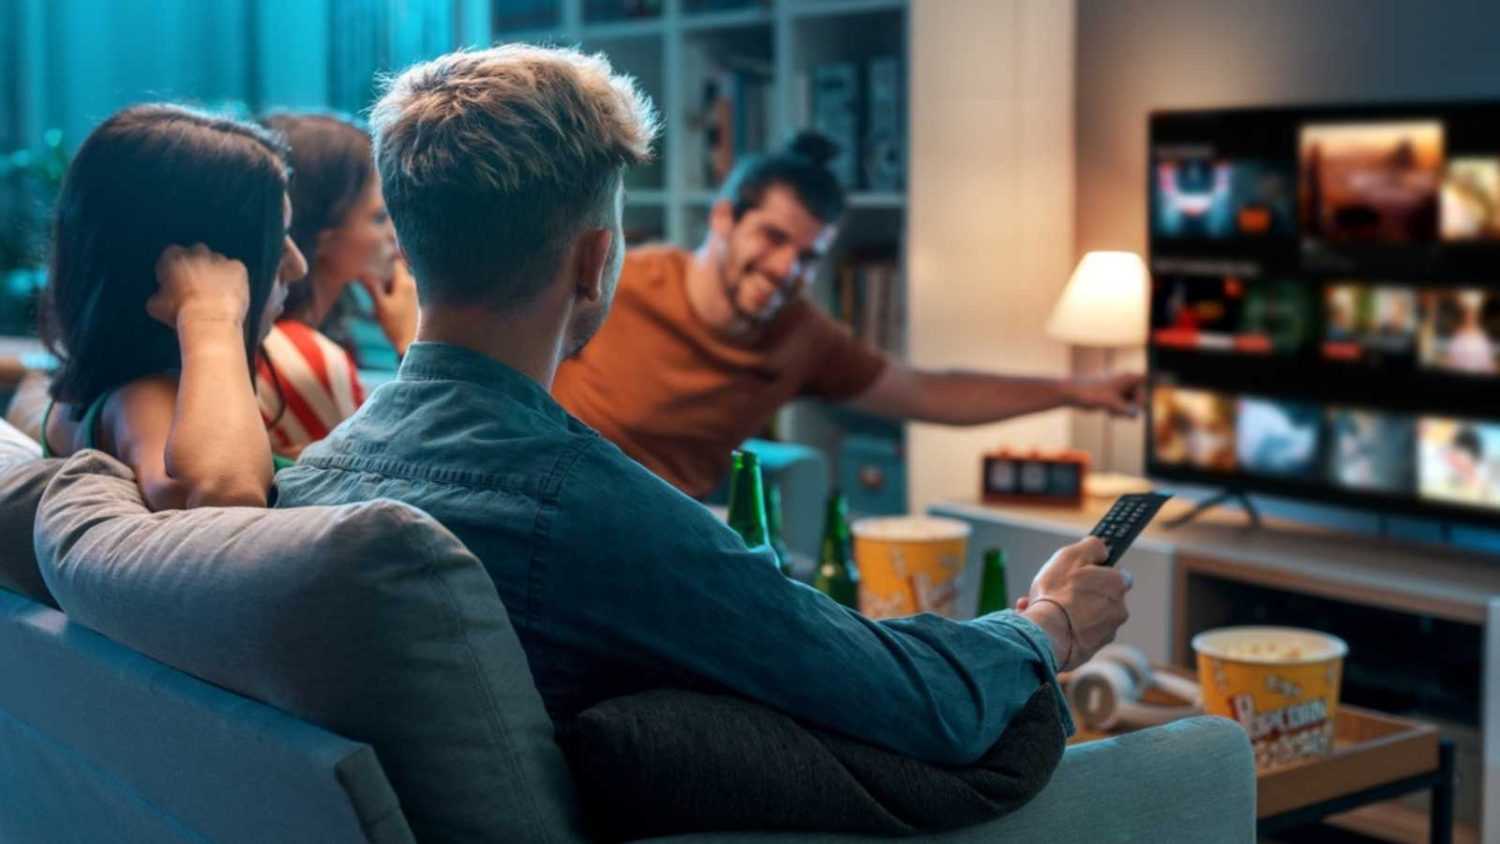 Friends choosing a movie to watch together at home, video on demand concept